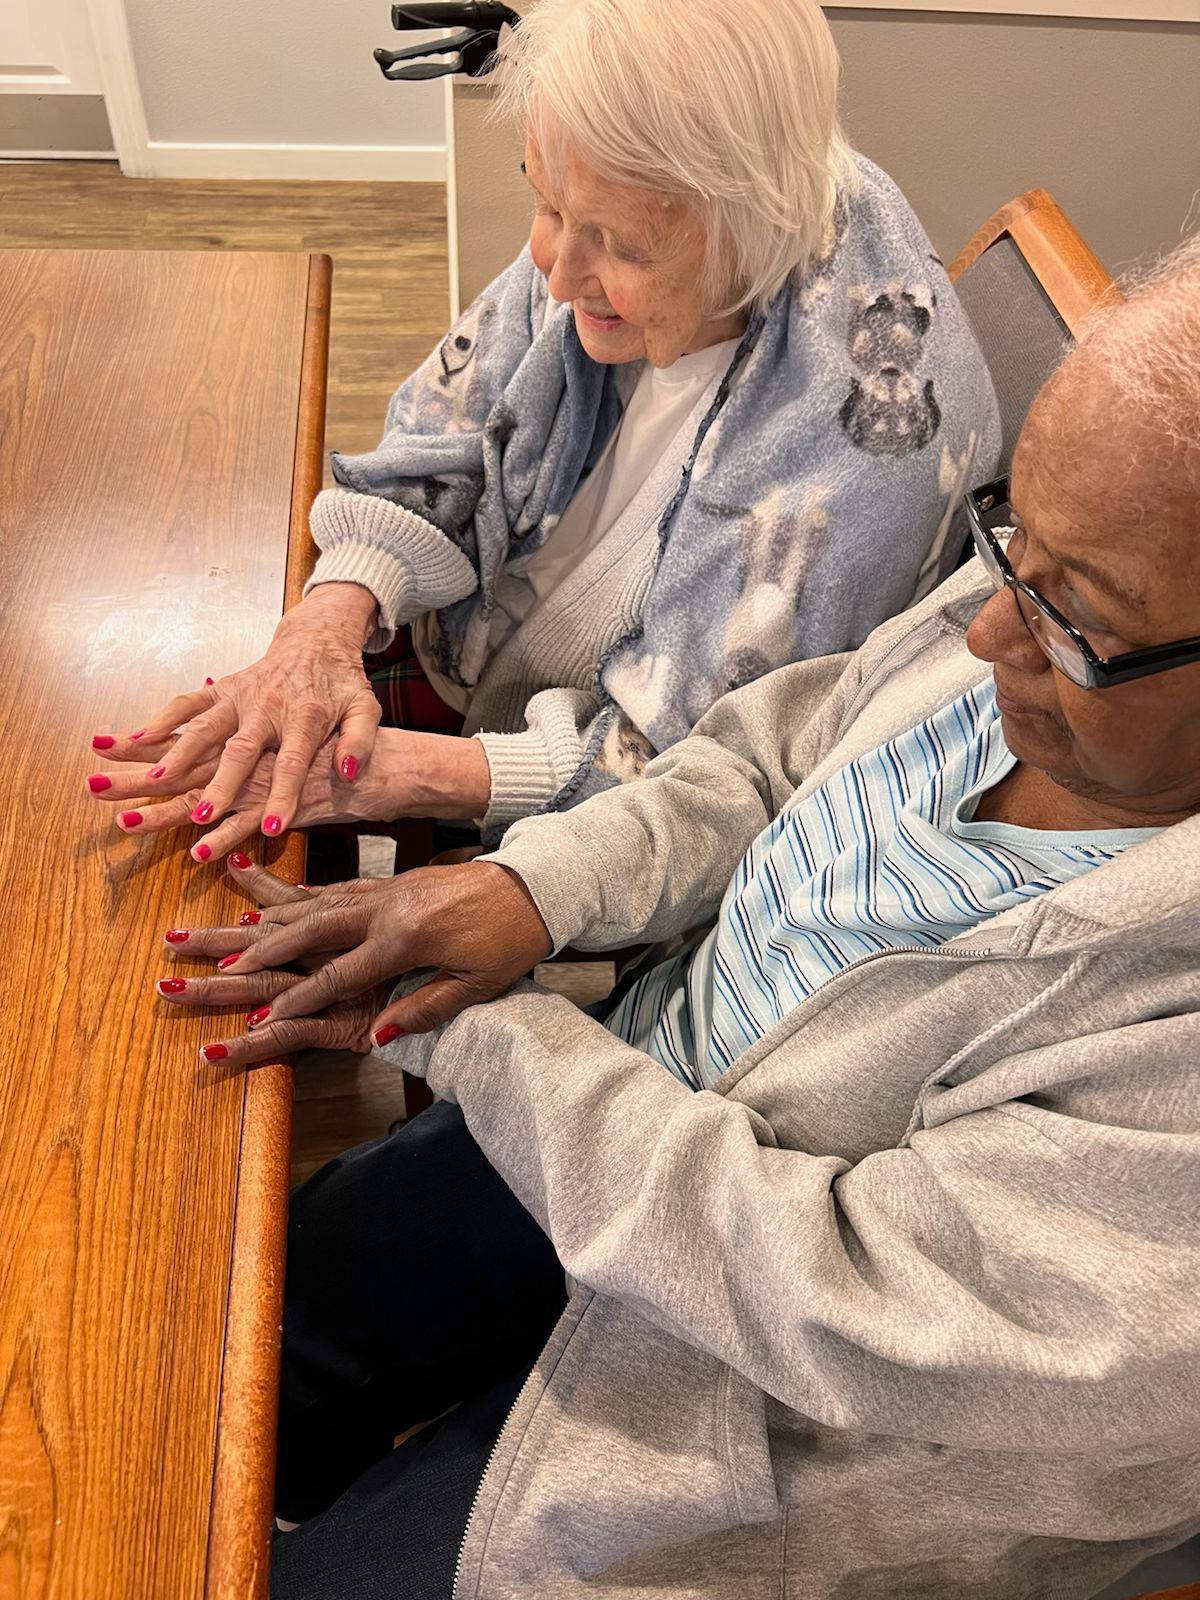 residents showing off their manicures